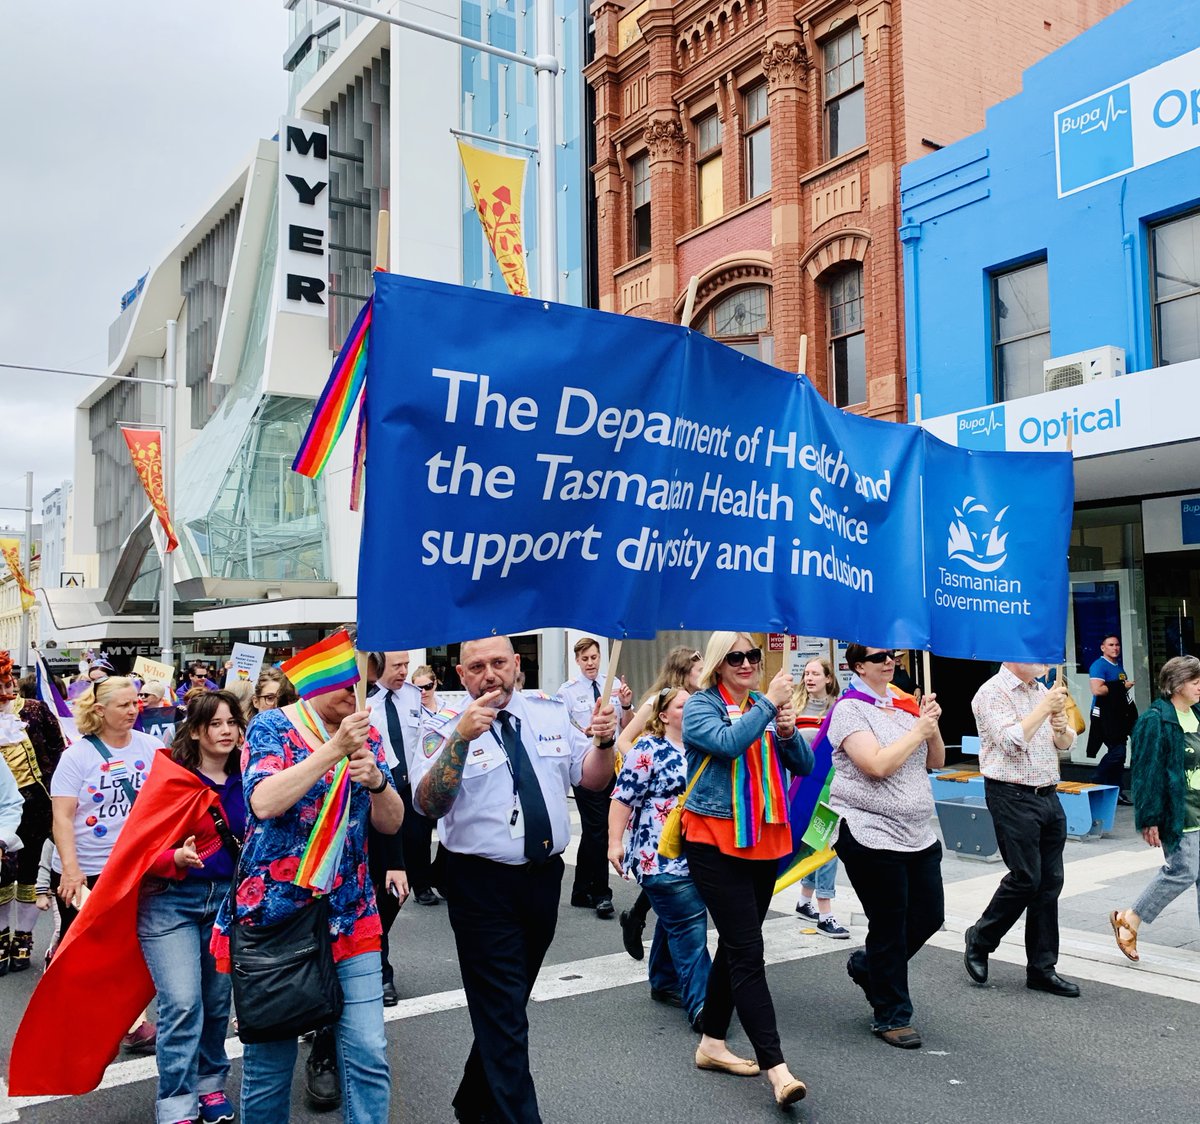 🏳️‍🌈On Saturday we marched in the 2020 TasPride Parade to celebrate Tasmania’s LGBTIQ community.🏳️‍🌈 Thanks to all our staff who participated, it was fantastic to see so many people supporting the event. The Department of Health is committed to building an inclusive health service.